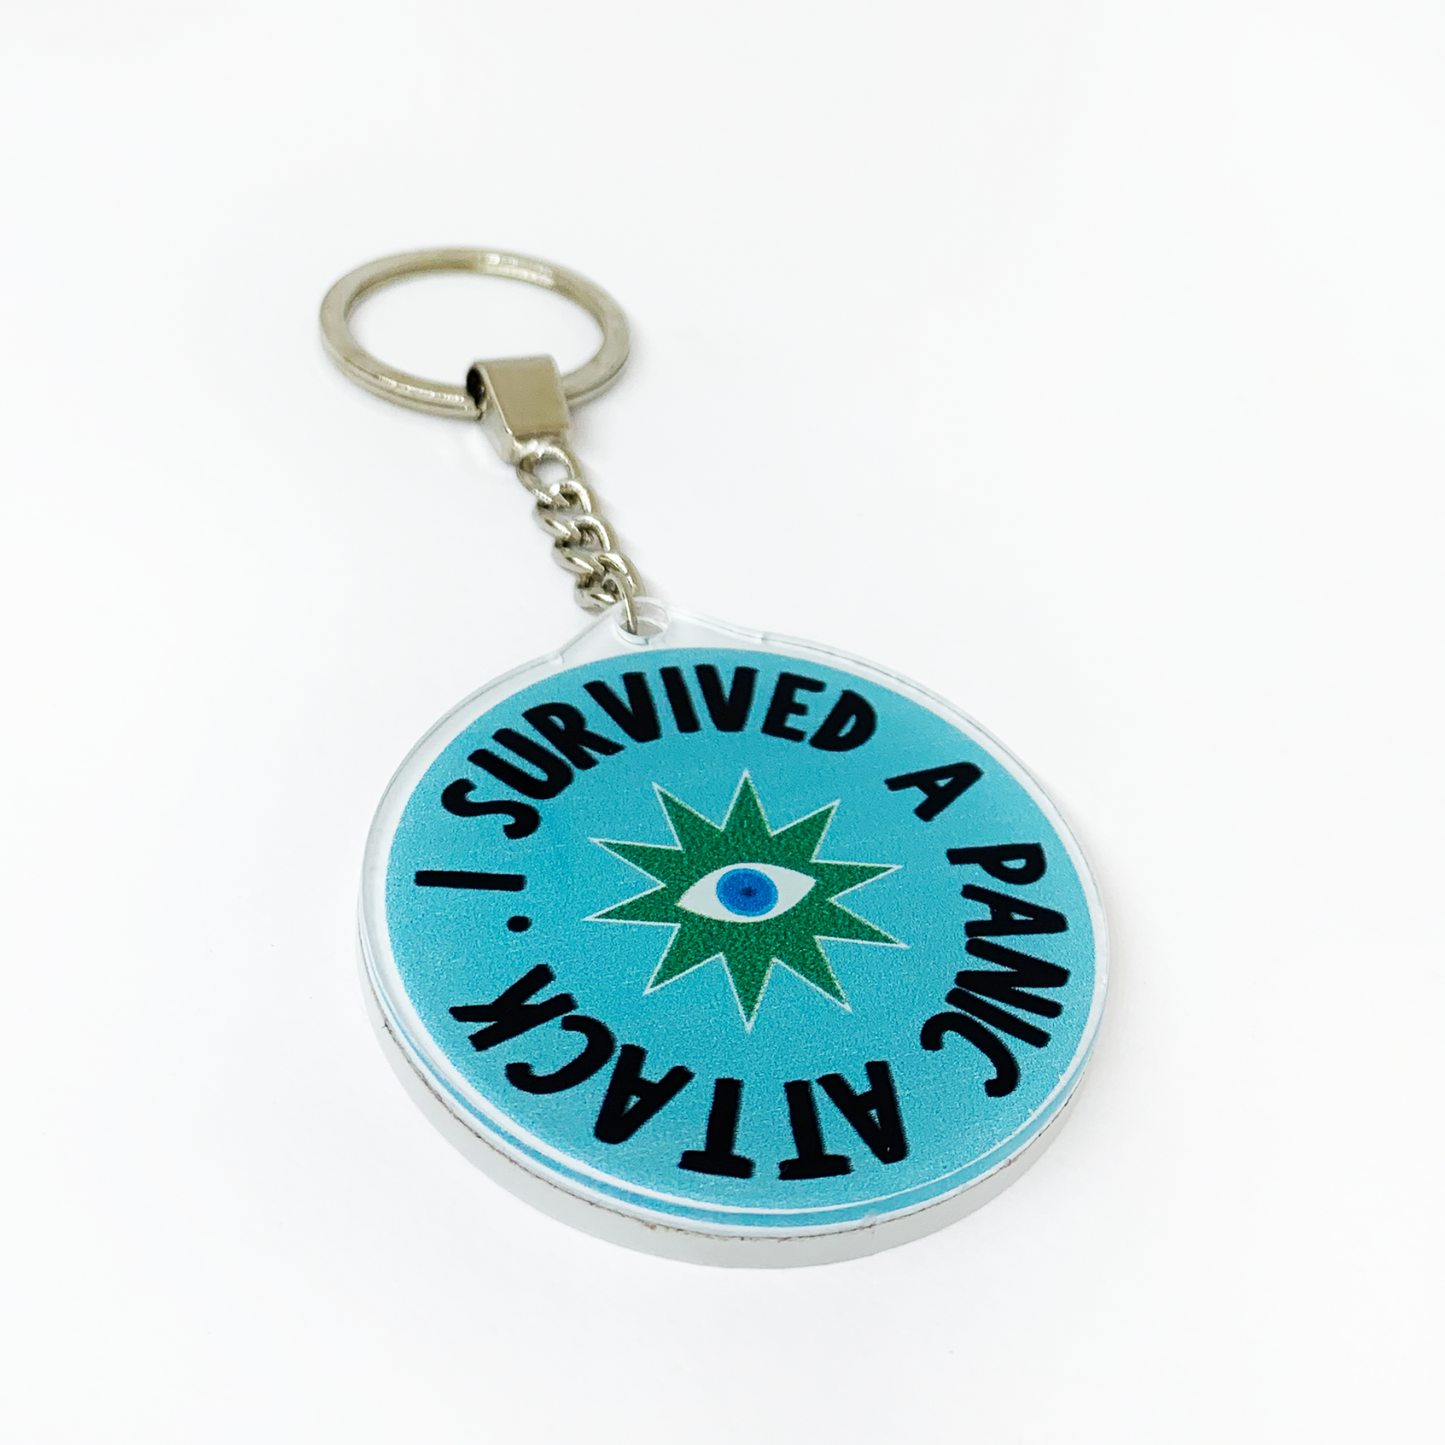 "I Survived A Panic Attack" Keychain